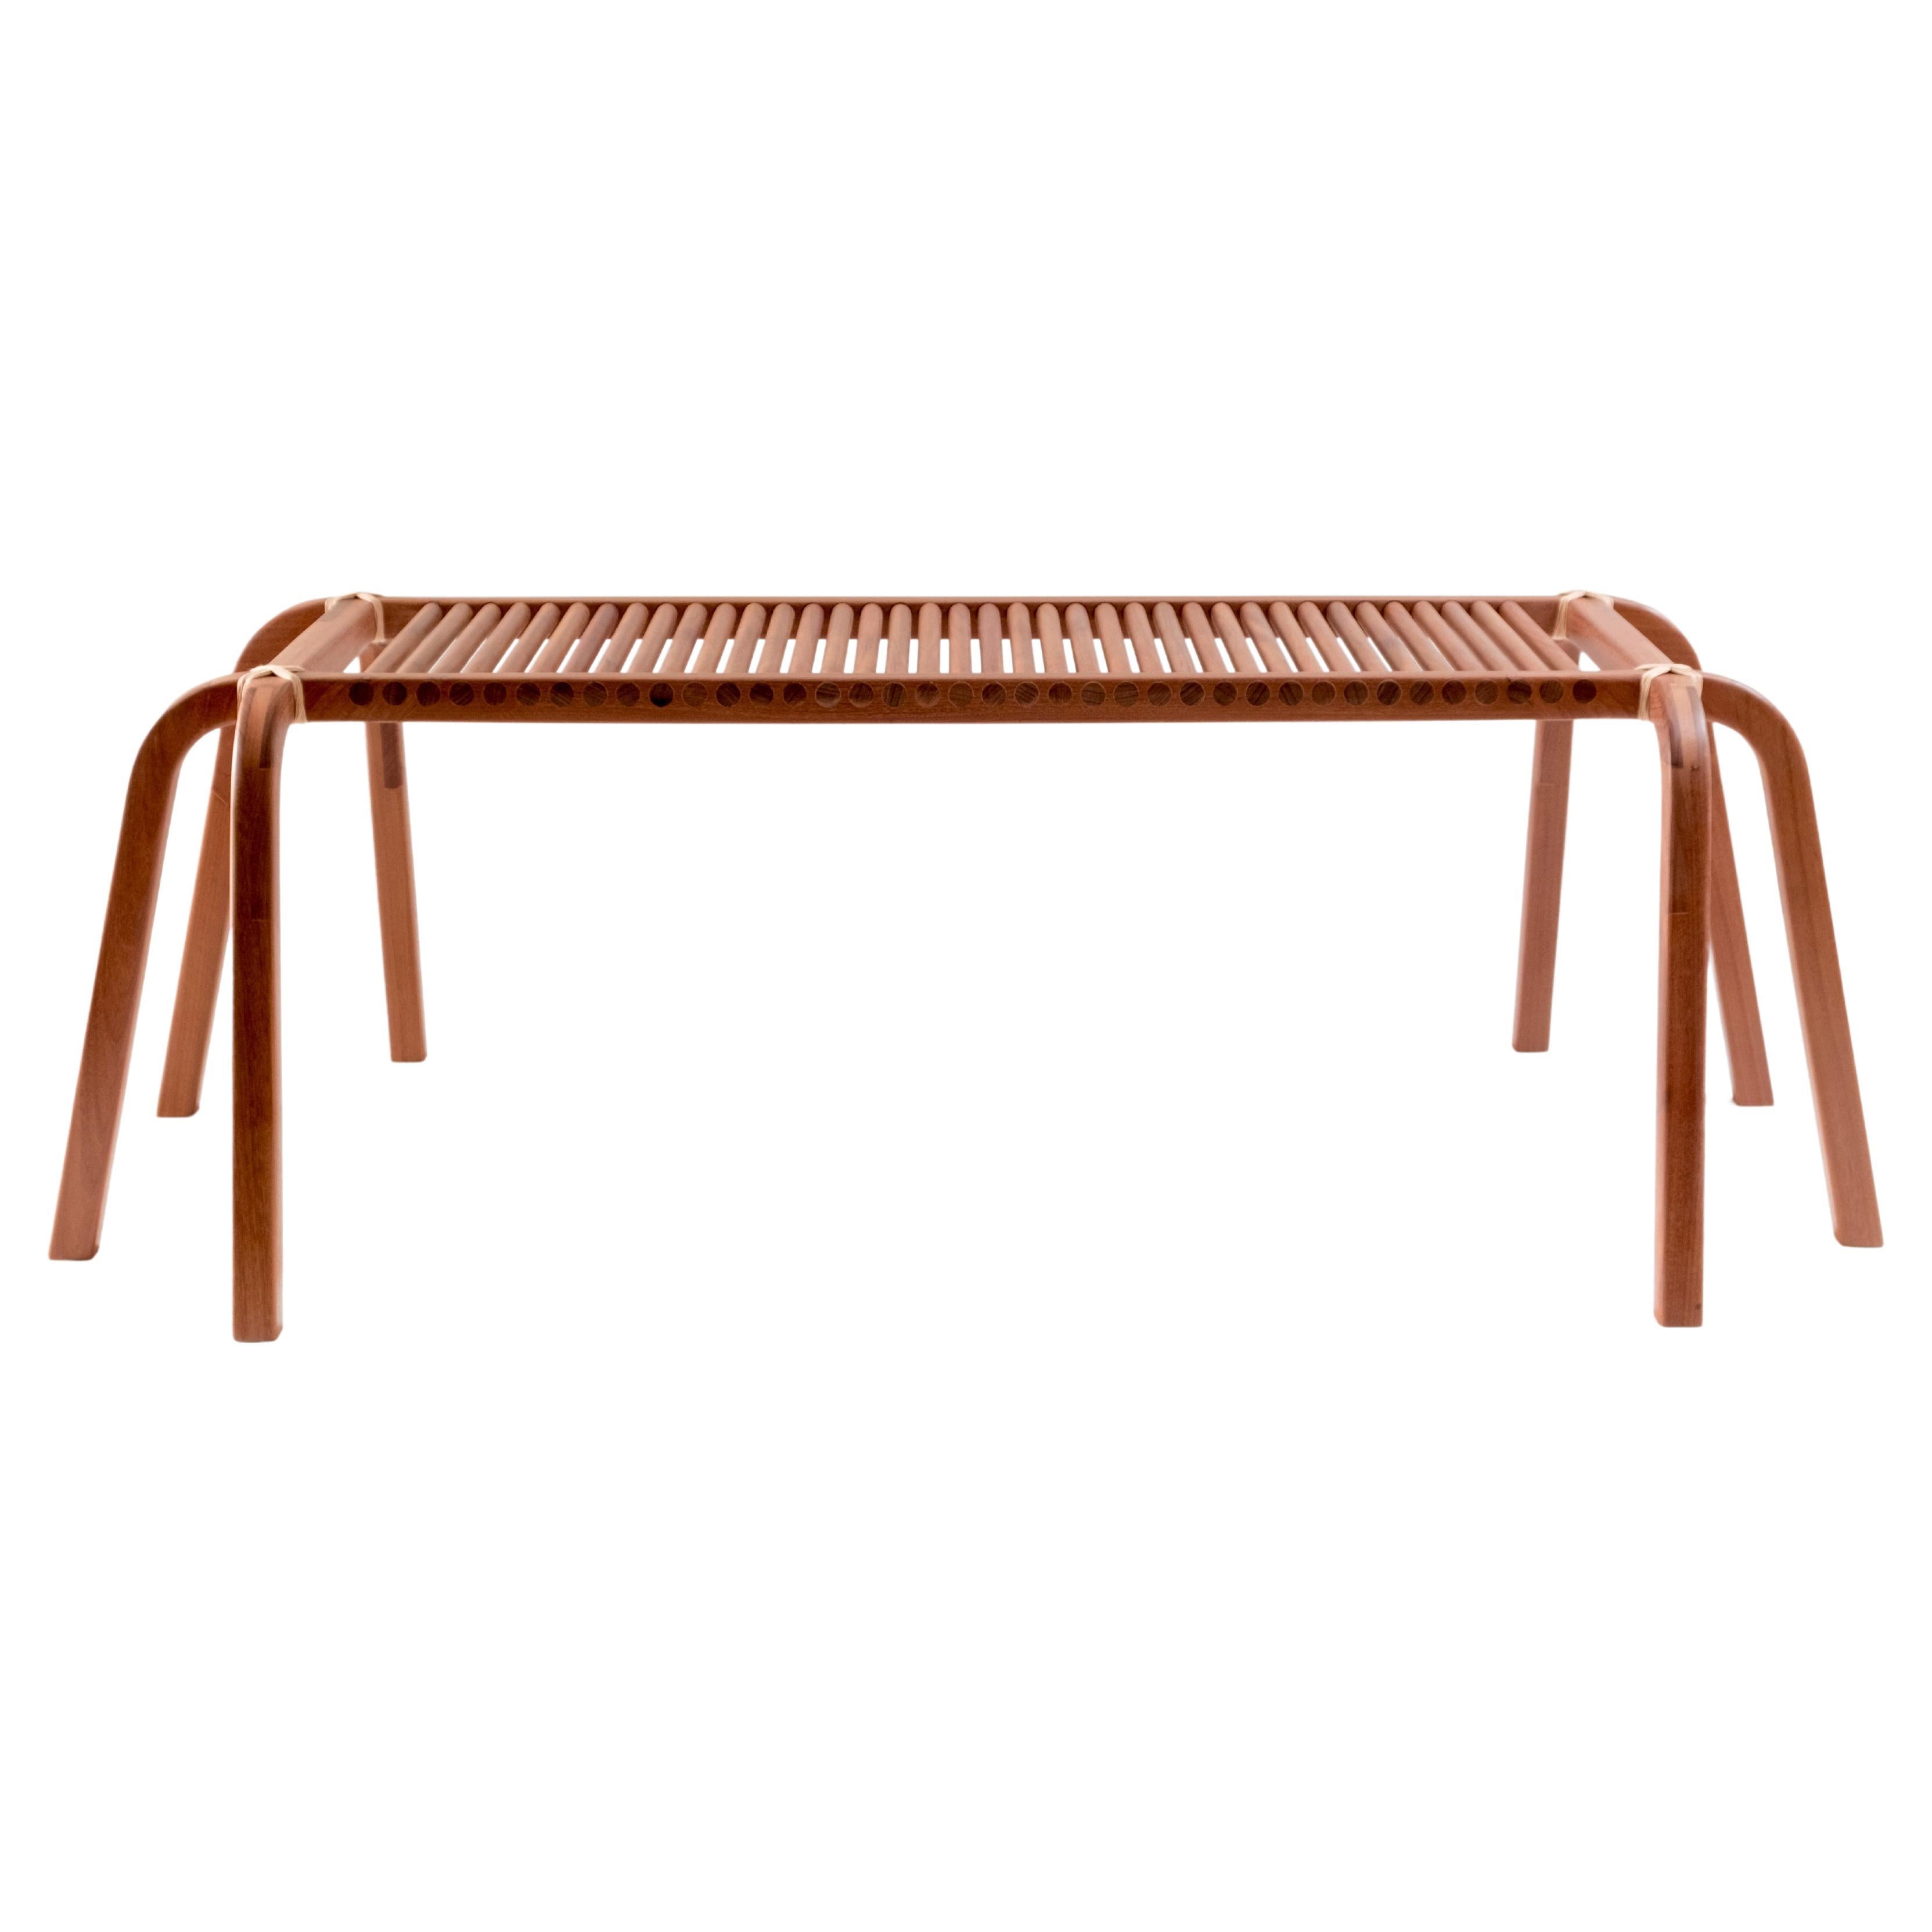 Embira Bench: made in Brazil with pink jequitba wood and natural dyed yarns For Sale